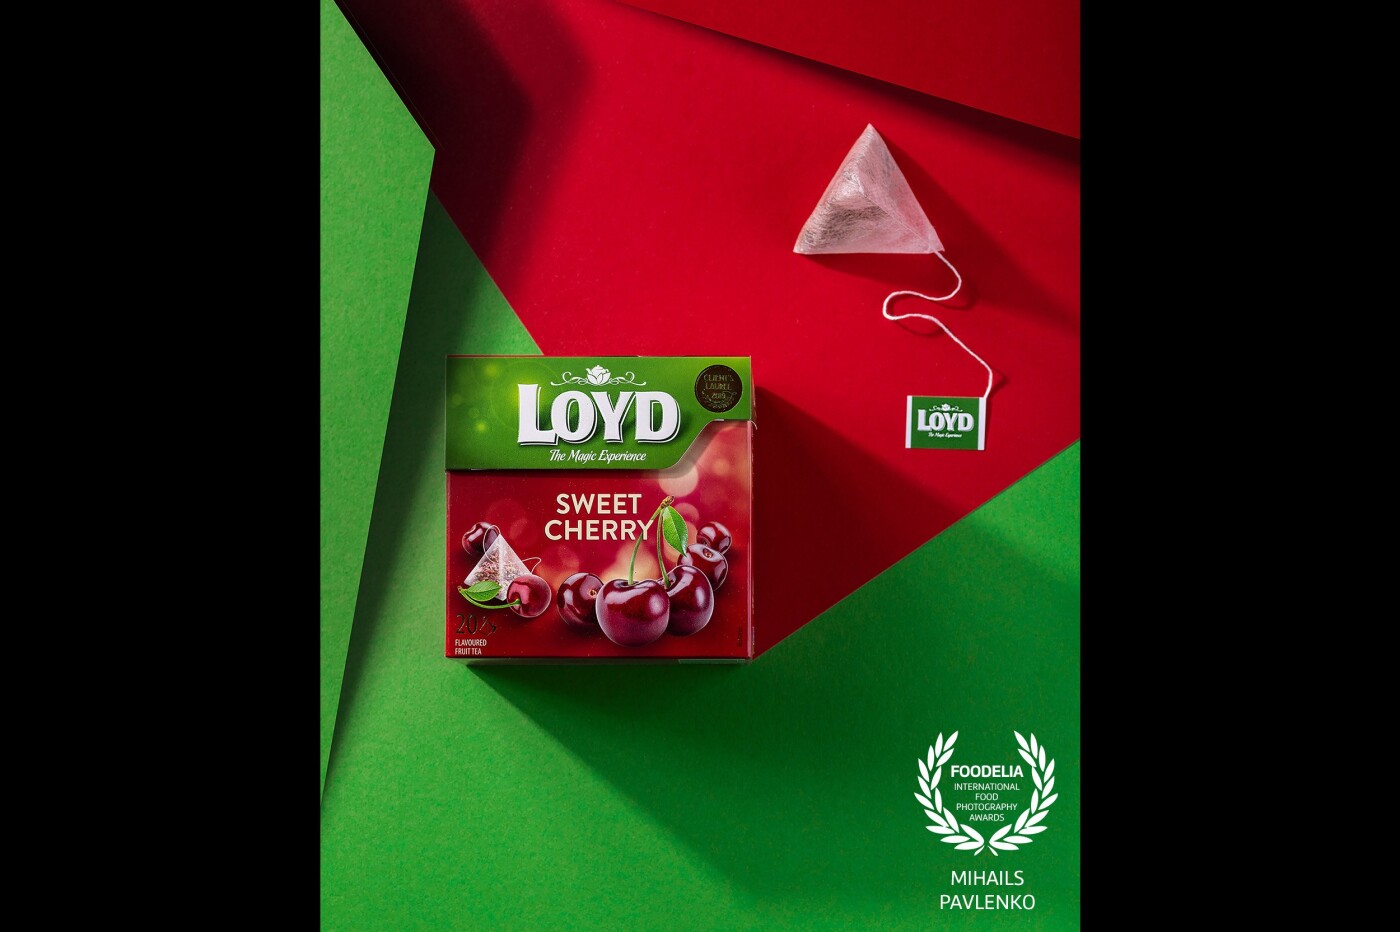 Product shooting of Loyd (@loydtea_official) sweet cherry tea with a triangular tea bag on two-color (red and green) papers. ISO- 125, f/8, 1/160.